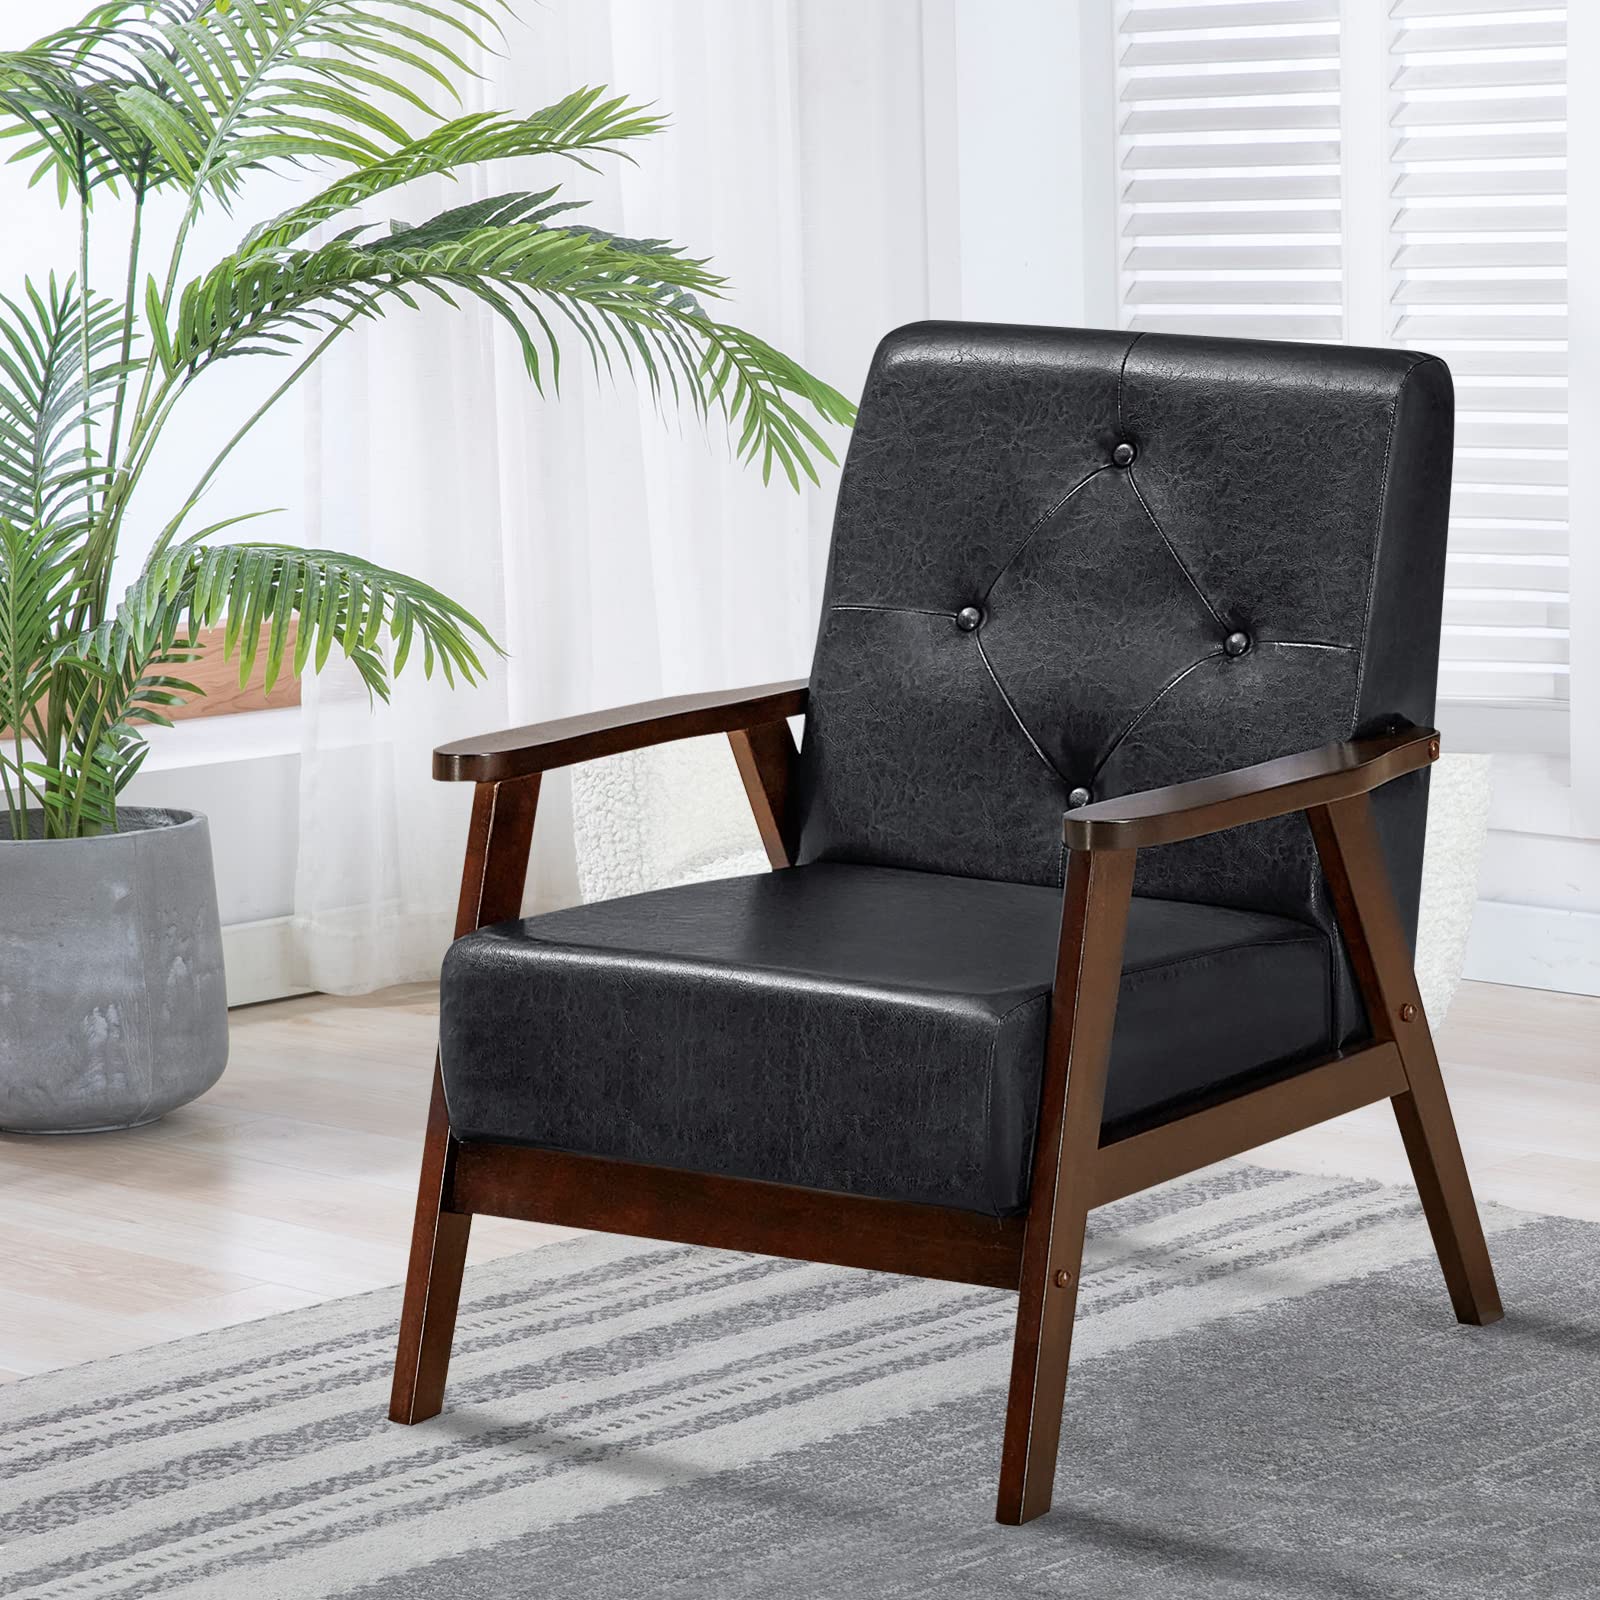 Giantex Accent Chair, Mid Century Living Room Chair, Black PU Leather Armchair